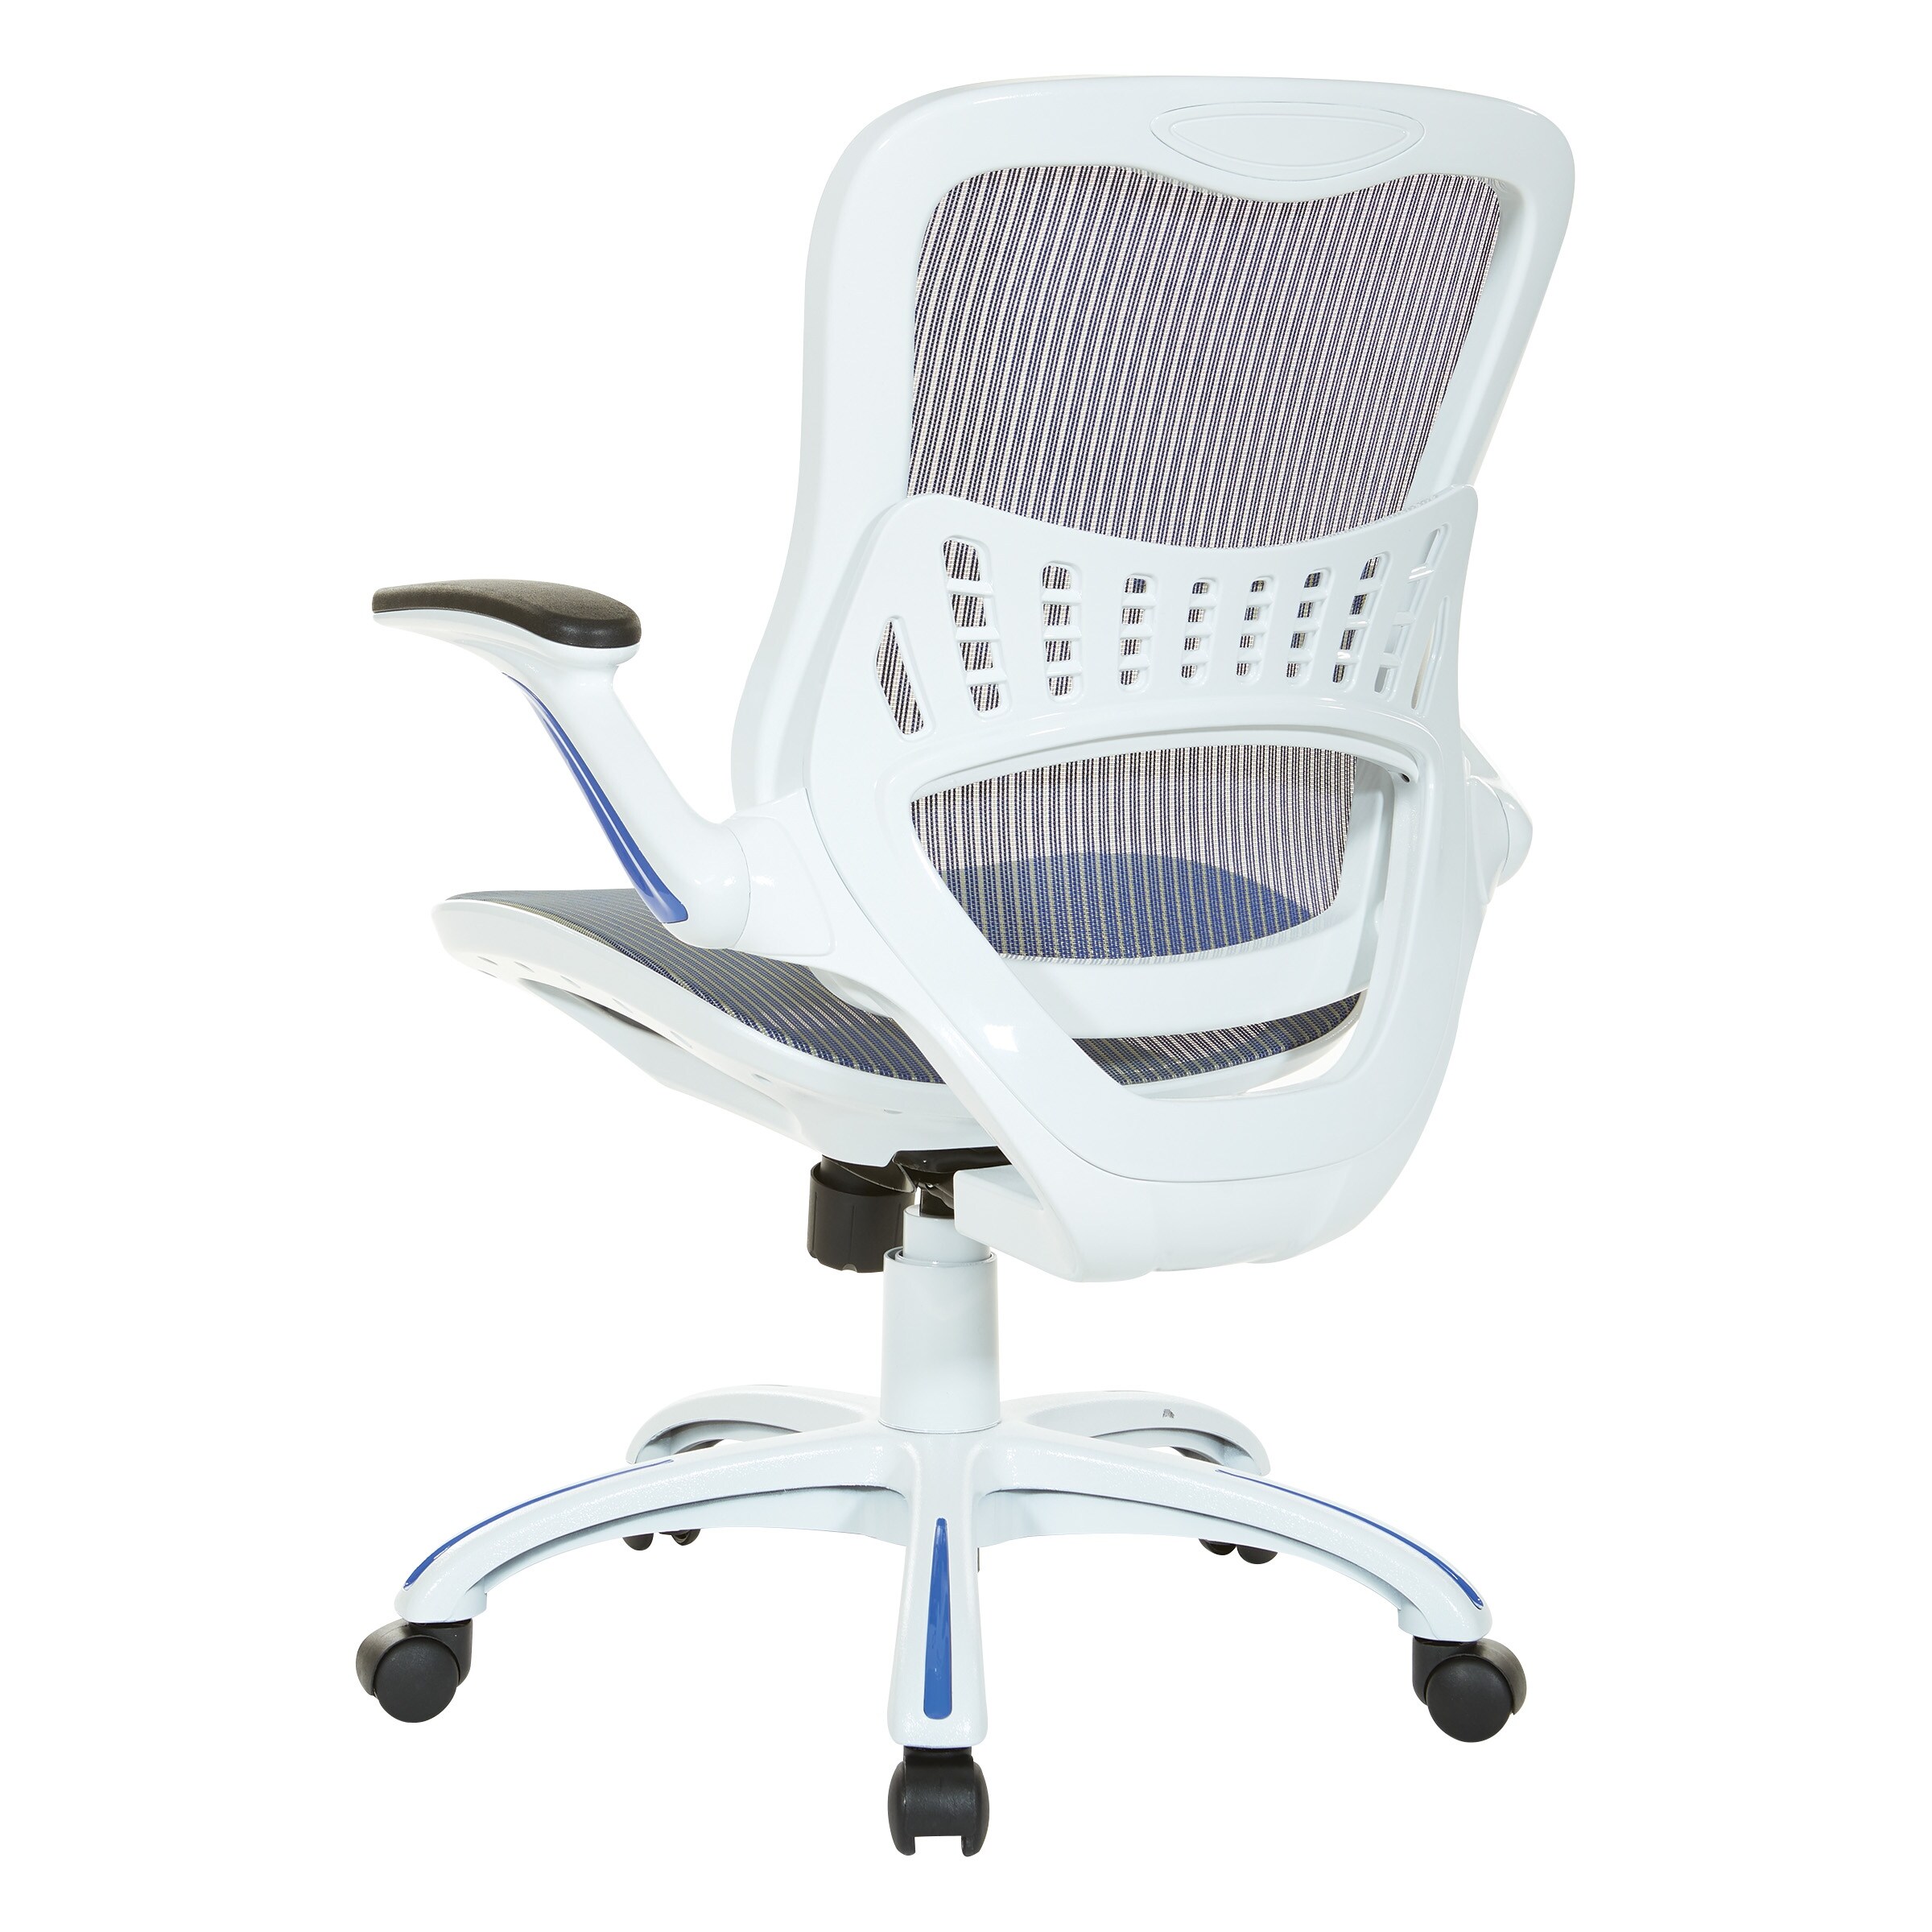 OSP Furniture RLY26-WH Riley Office Chair 